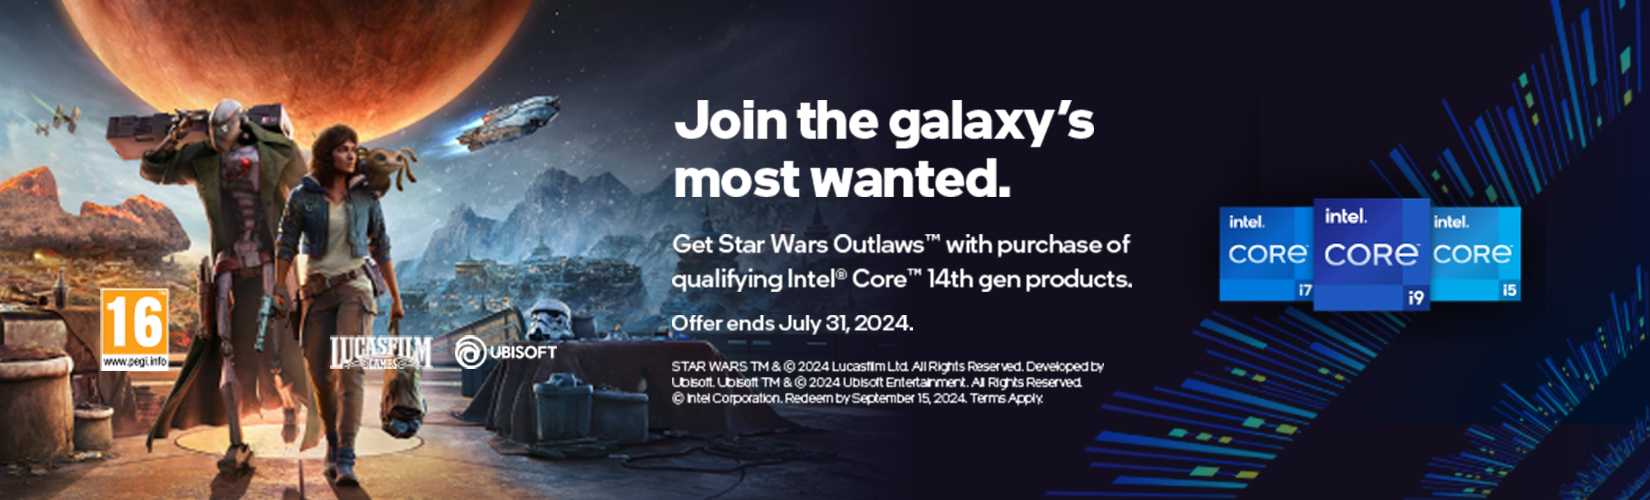 Star Wars Outlaws. Join the galaxy's most wanted.